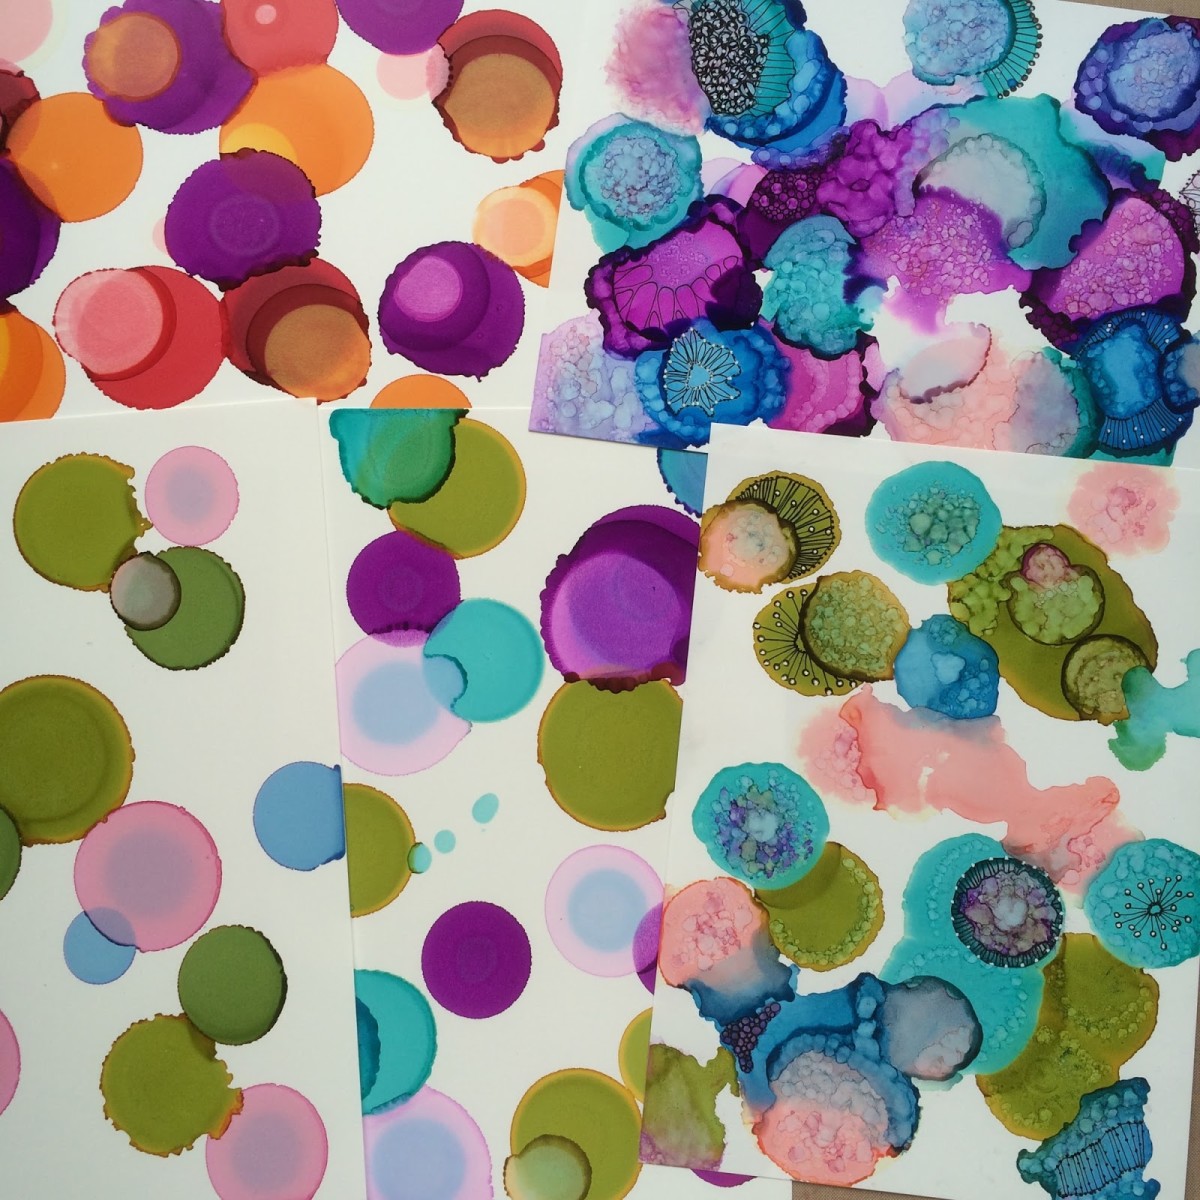 Simple drops of alcohol inks on yupo paper. One of the easiest techniques